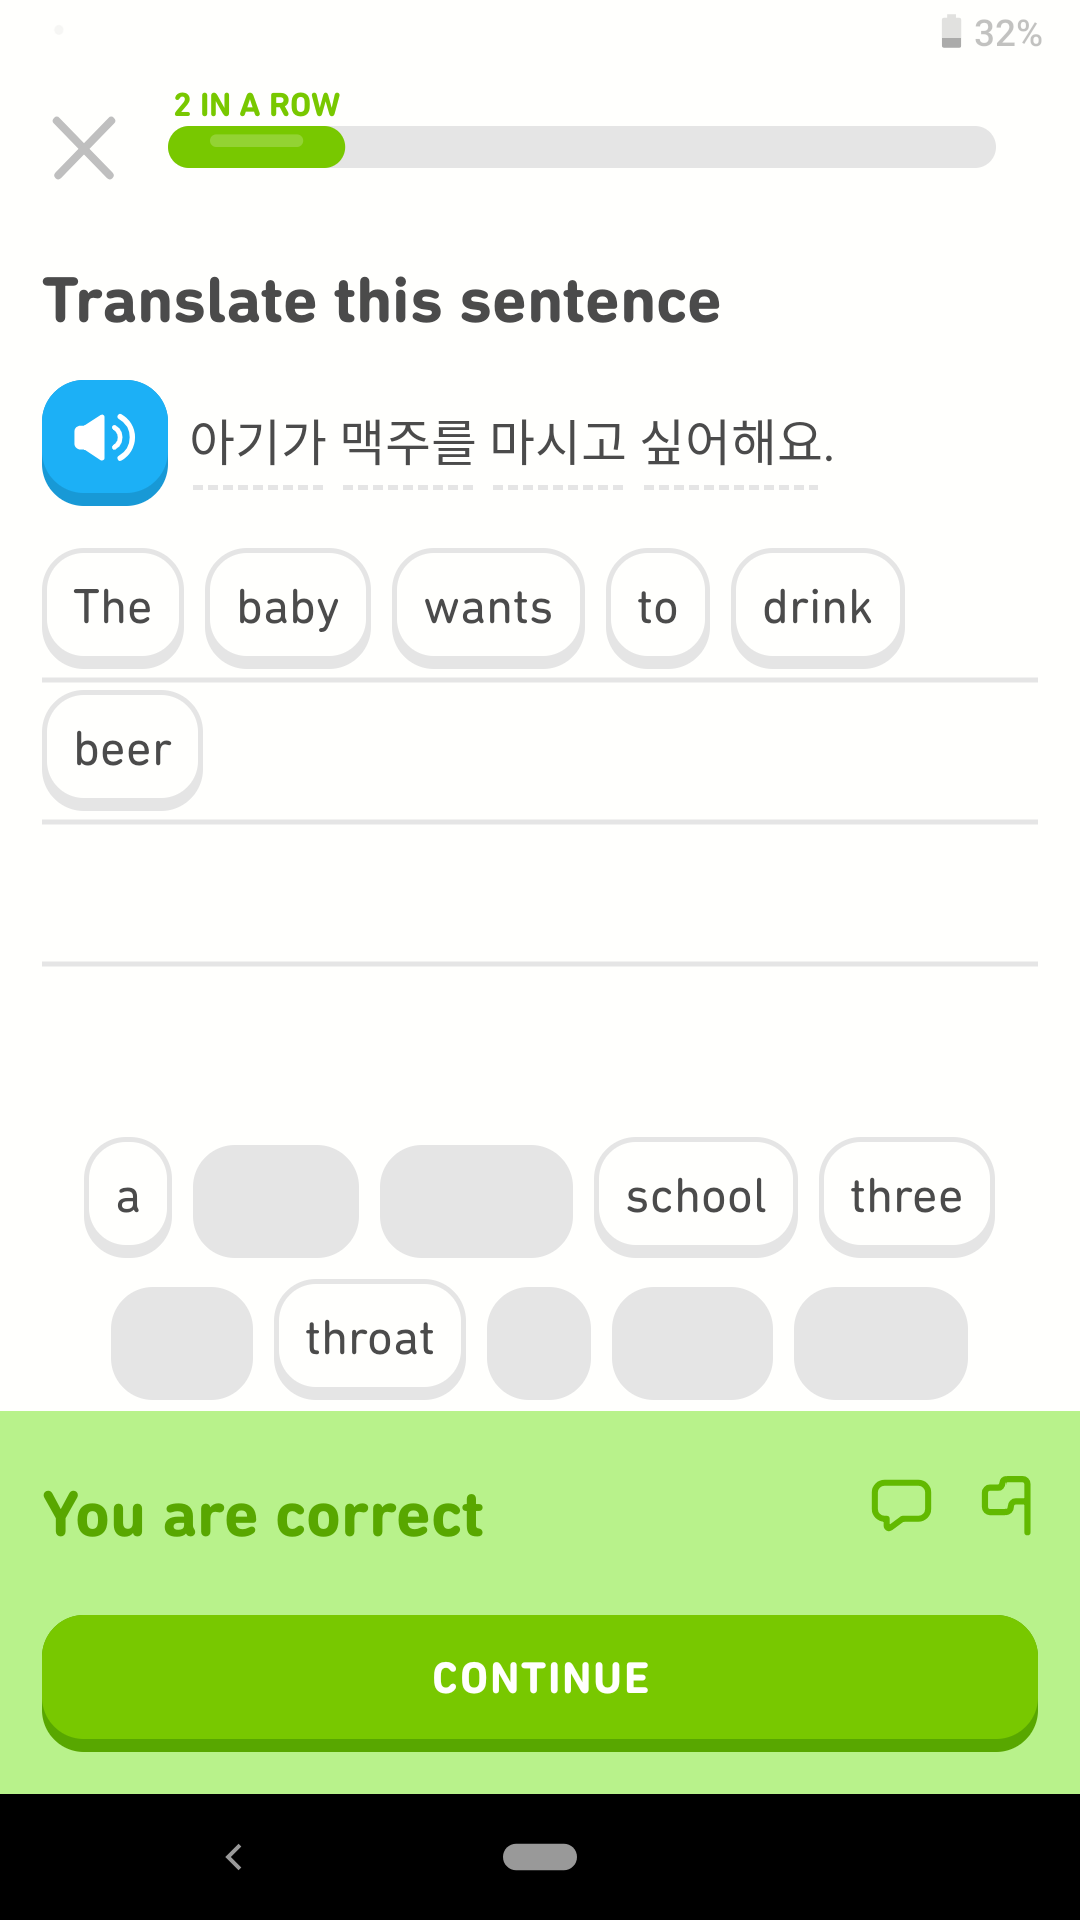 A screenshot of the Duolingo app showing the successful completion of an exercise. The text says "The baby wants to drink beer" in English and "아기가 맥주를 마시고 싶어해요" in Korean.